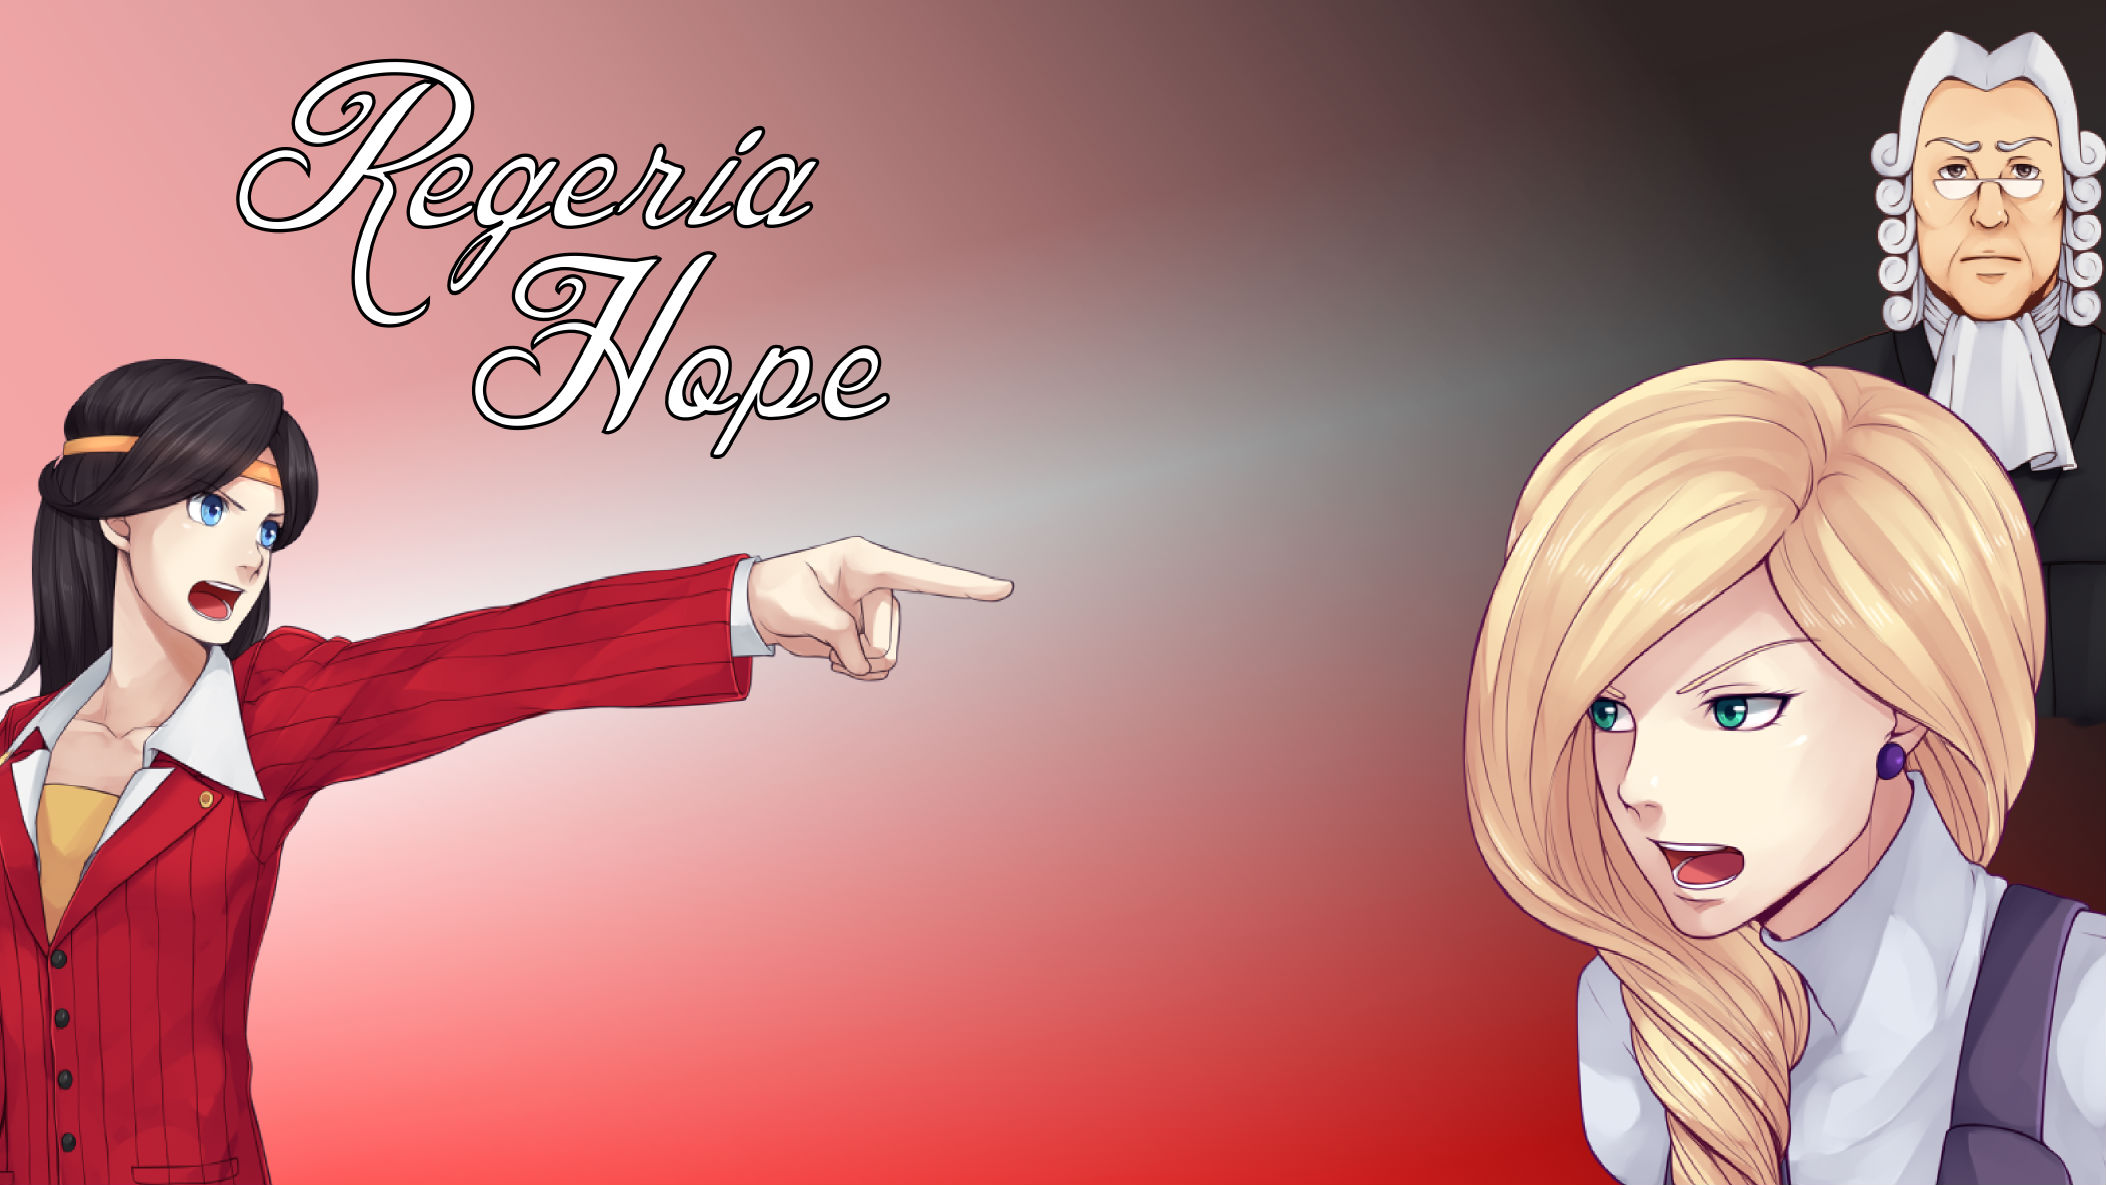 Regeria Hope Episode 1 Review: No Objections